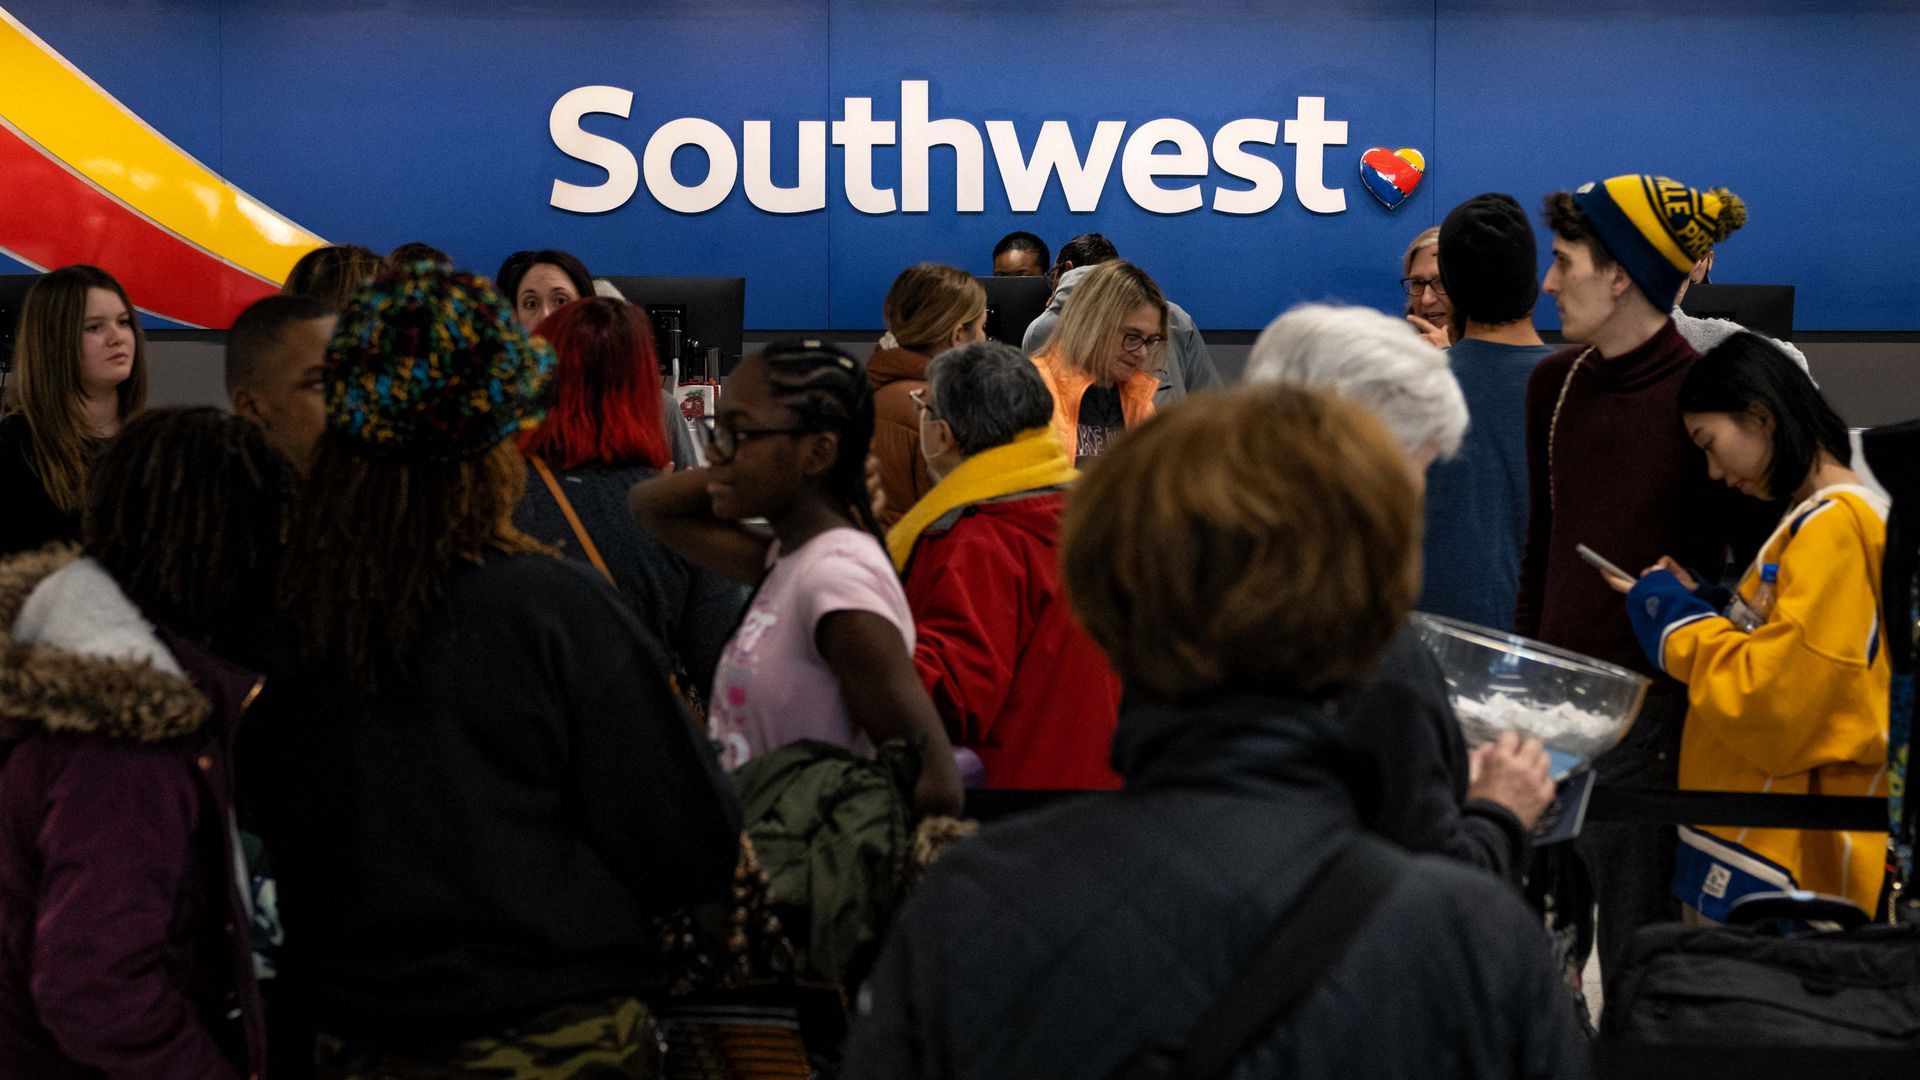 Travellers wait in line at the Southwest Airlines ticketing counter at Nashville International Airport after the airline cancelled thousands of flights in Nashville, Tennessee, on December 27, 2022.